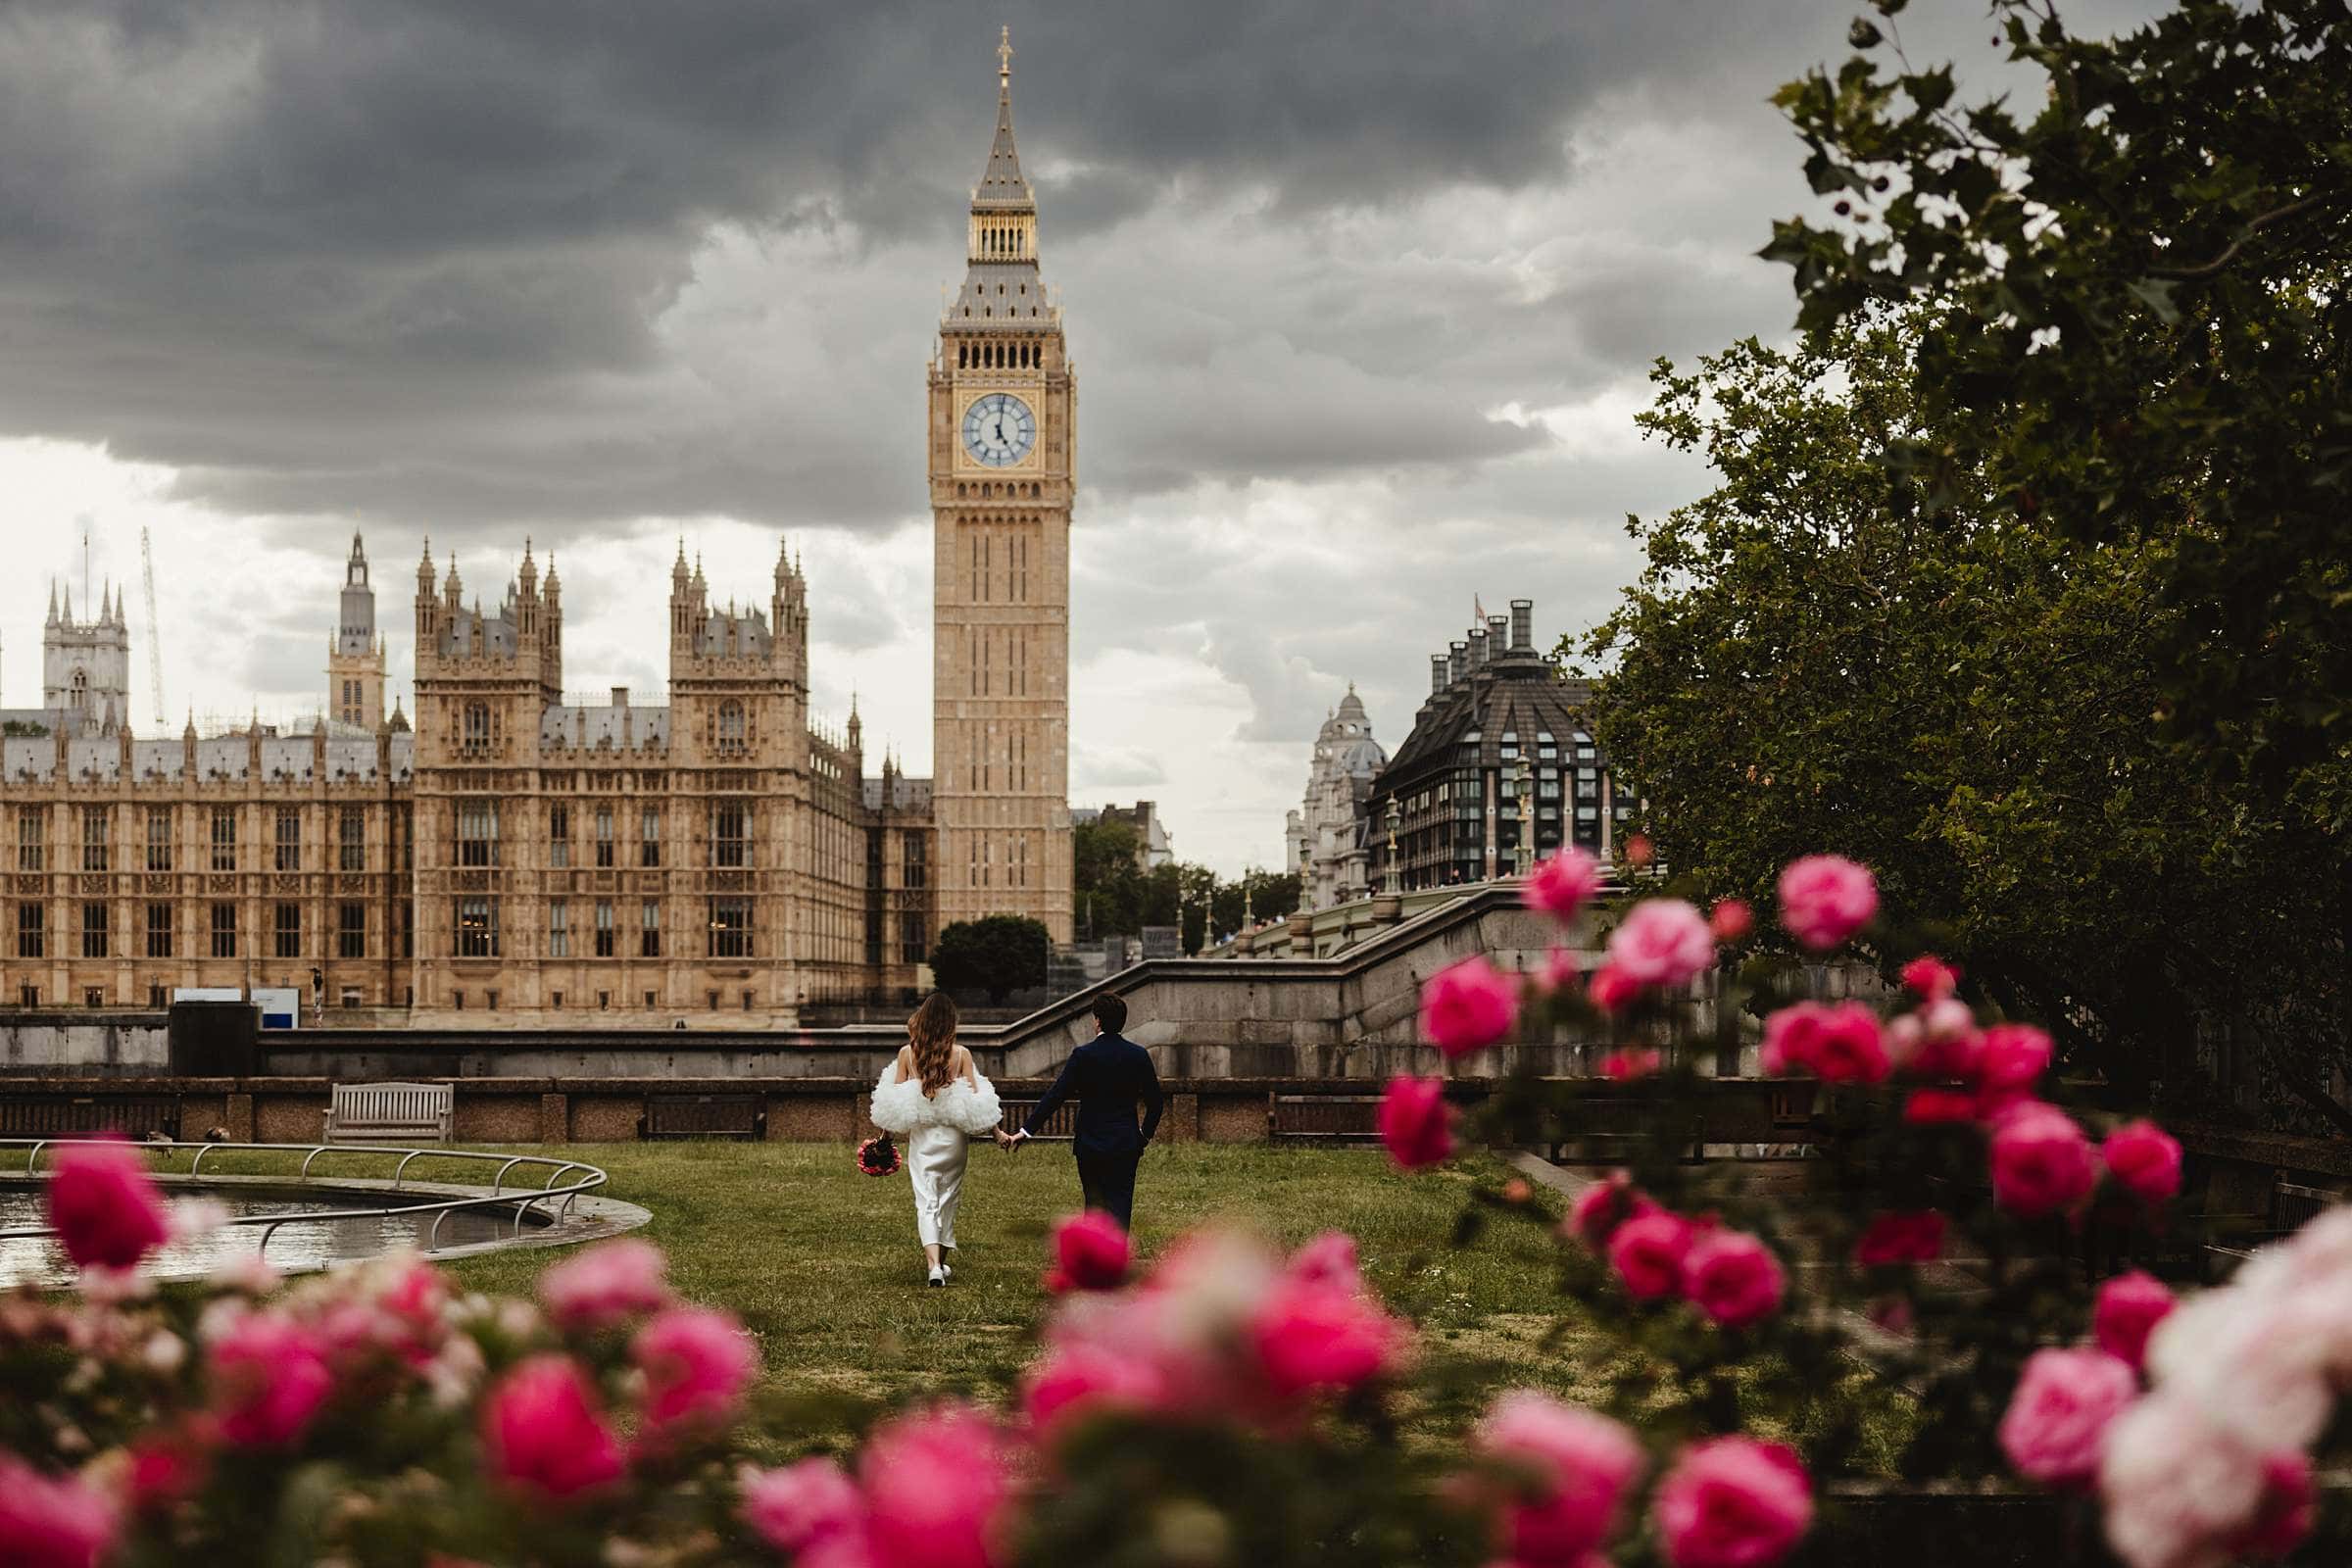 a creative London engagement photograph by Liam crawley